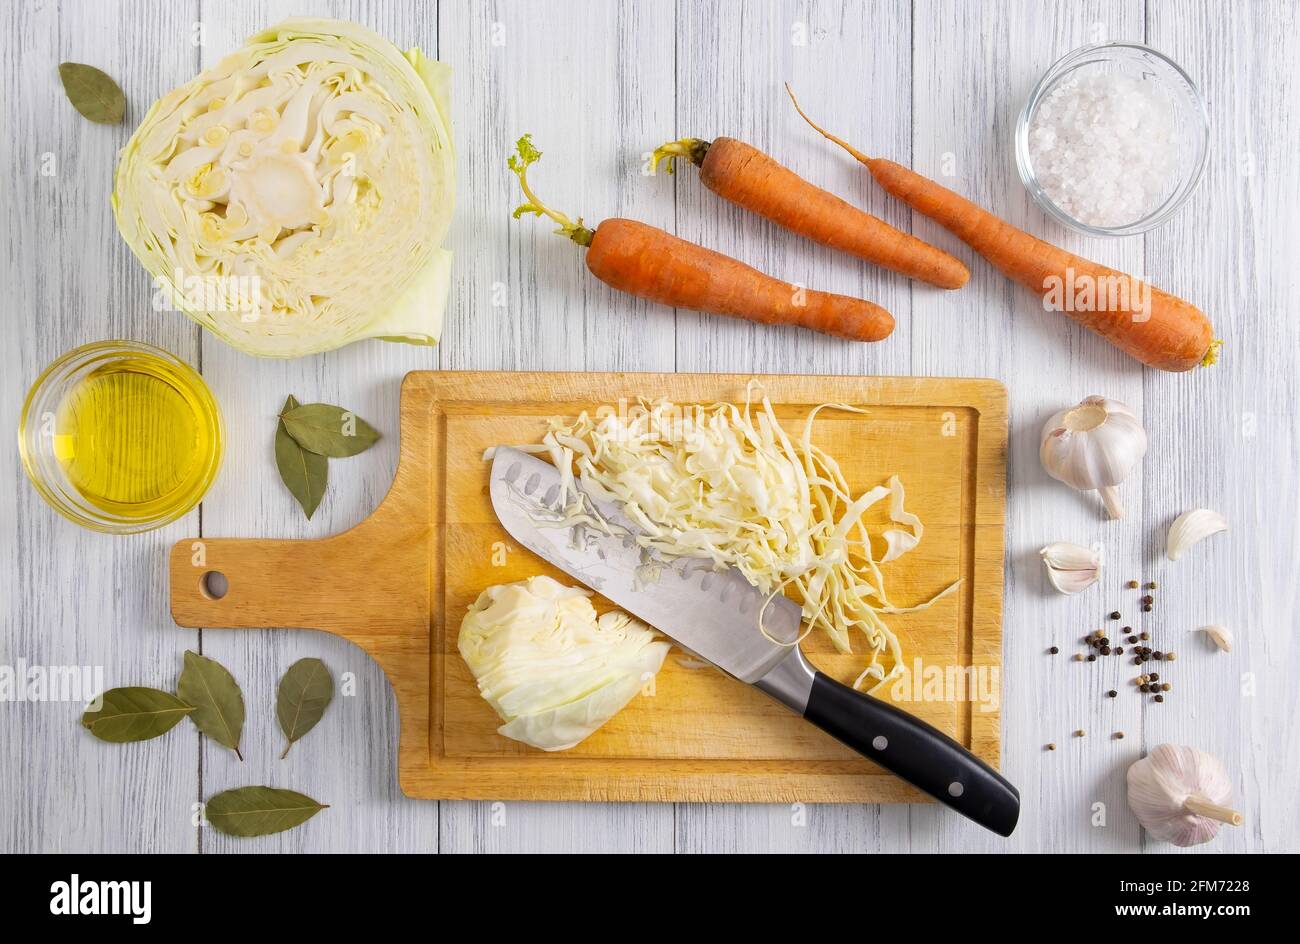 Kitchen workspace with white cabbage shredding process Stock Photo